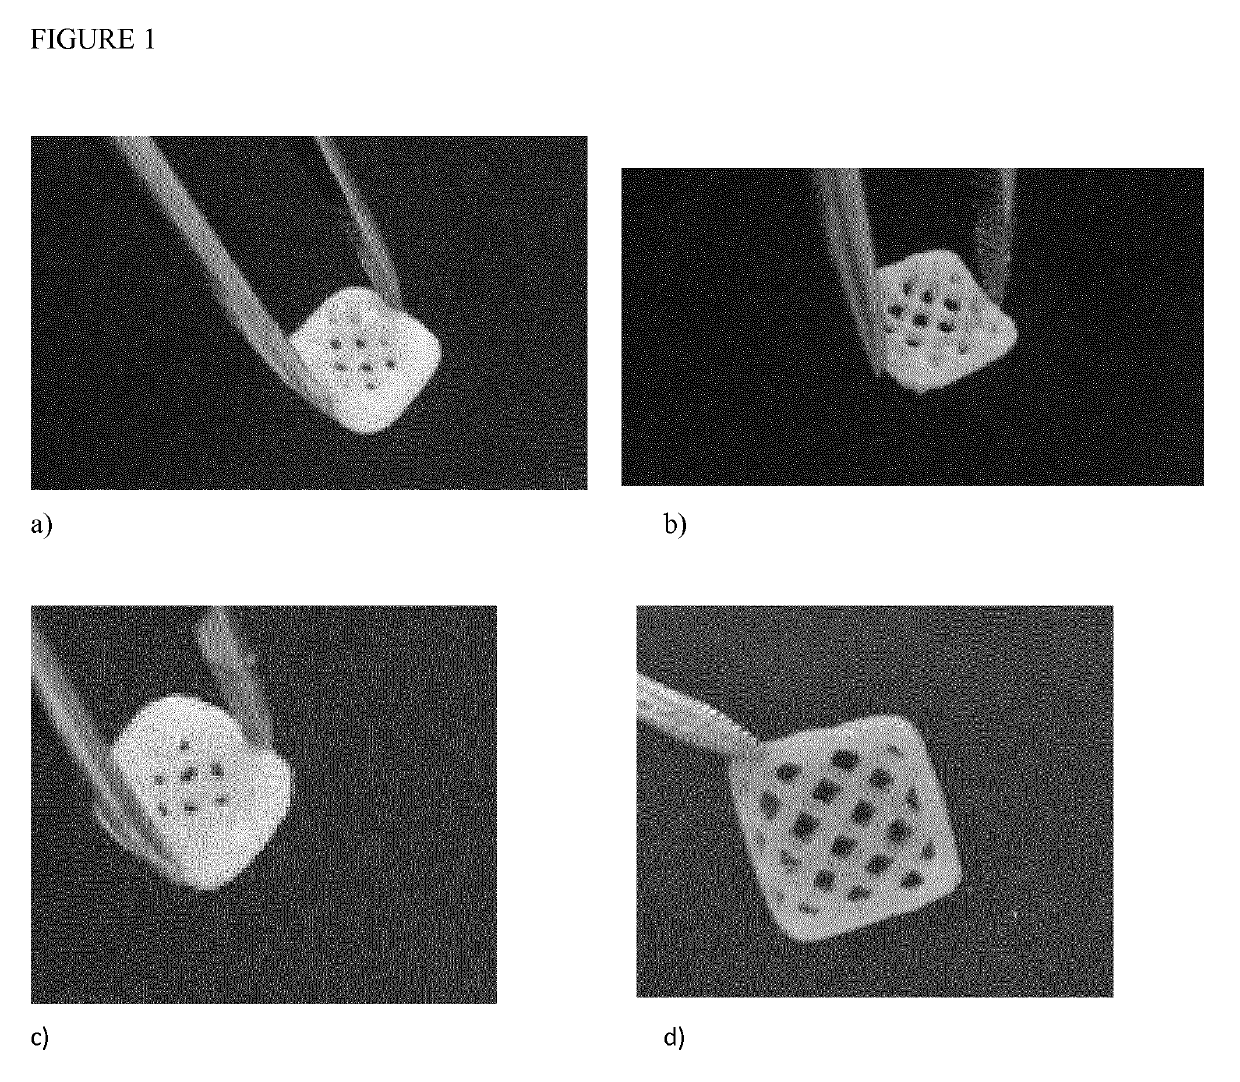 Preparation and Applications of 3D Bioprinting Bioinks for Repair of Bone Defects, Based on Cellulose Nanofibrils Hydrogels with Natural or Synthetic Calcium Phosphate Particles